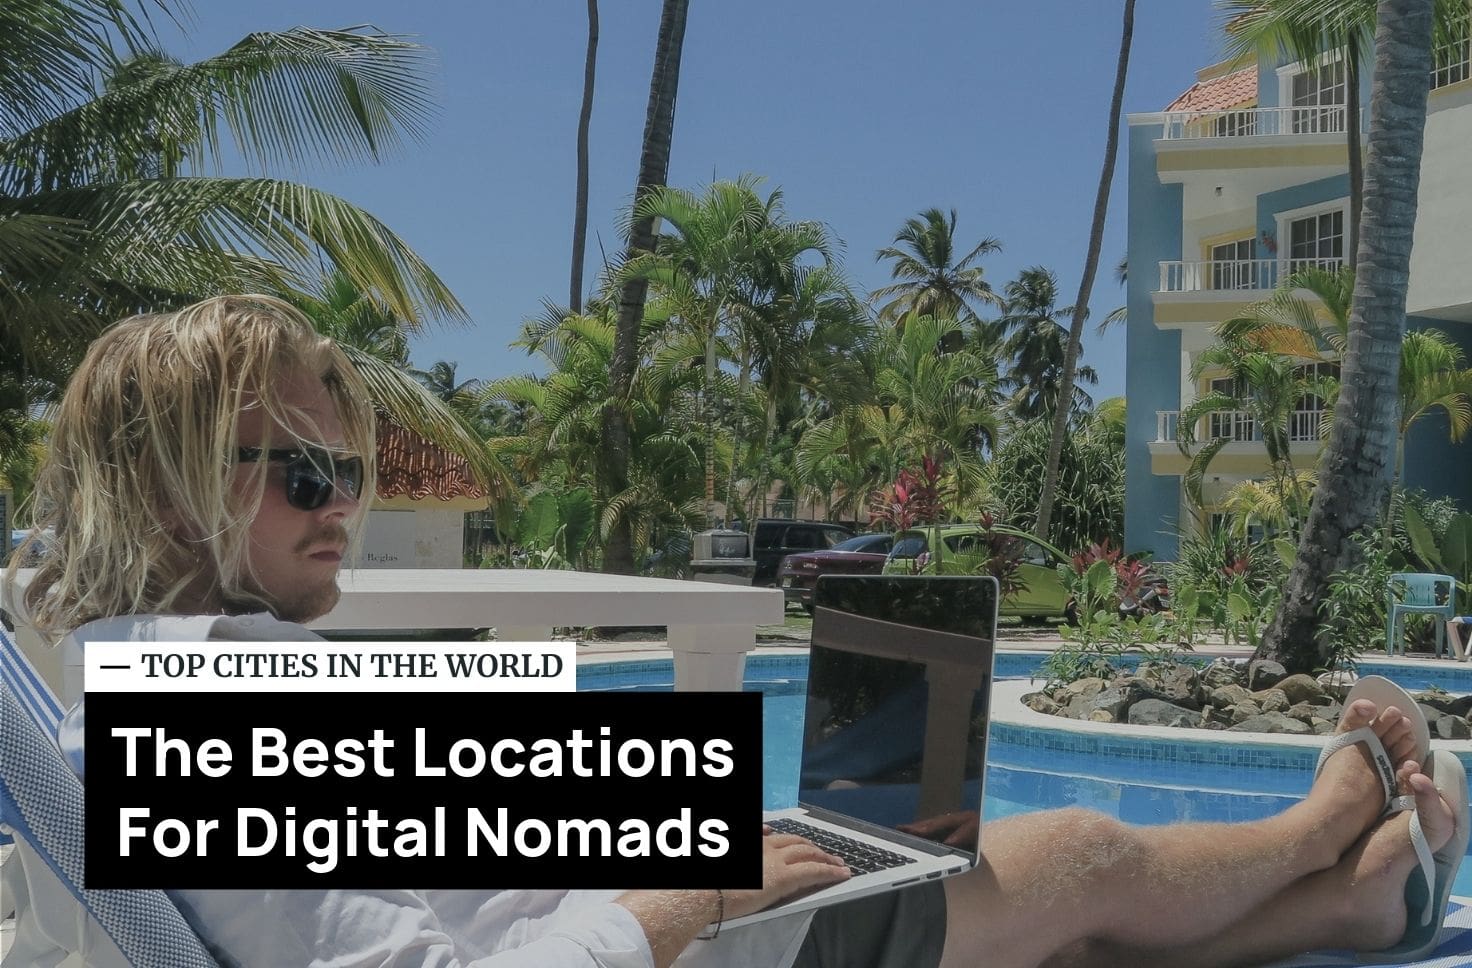 Canada's Digital Nomad Program: Come For 6 Months, Stay Indefinitely